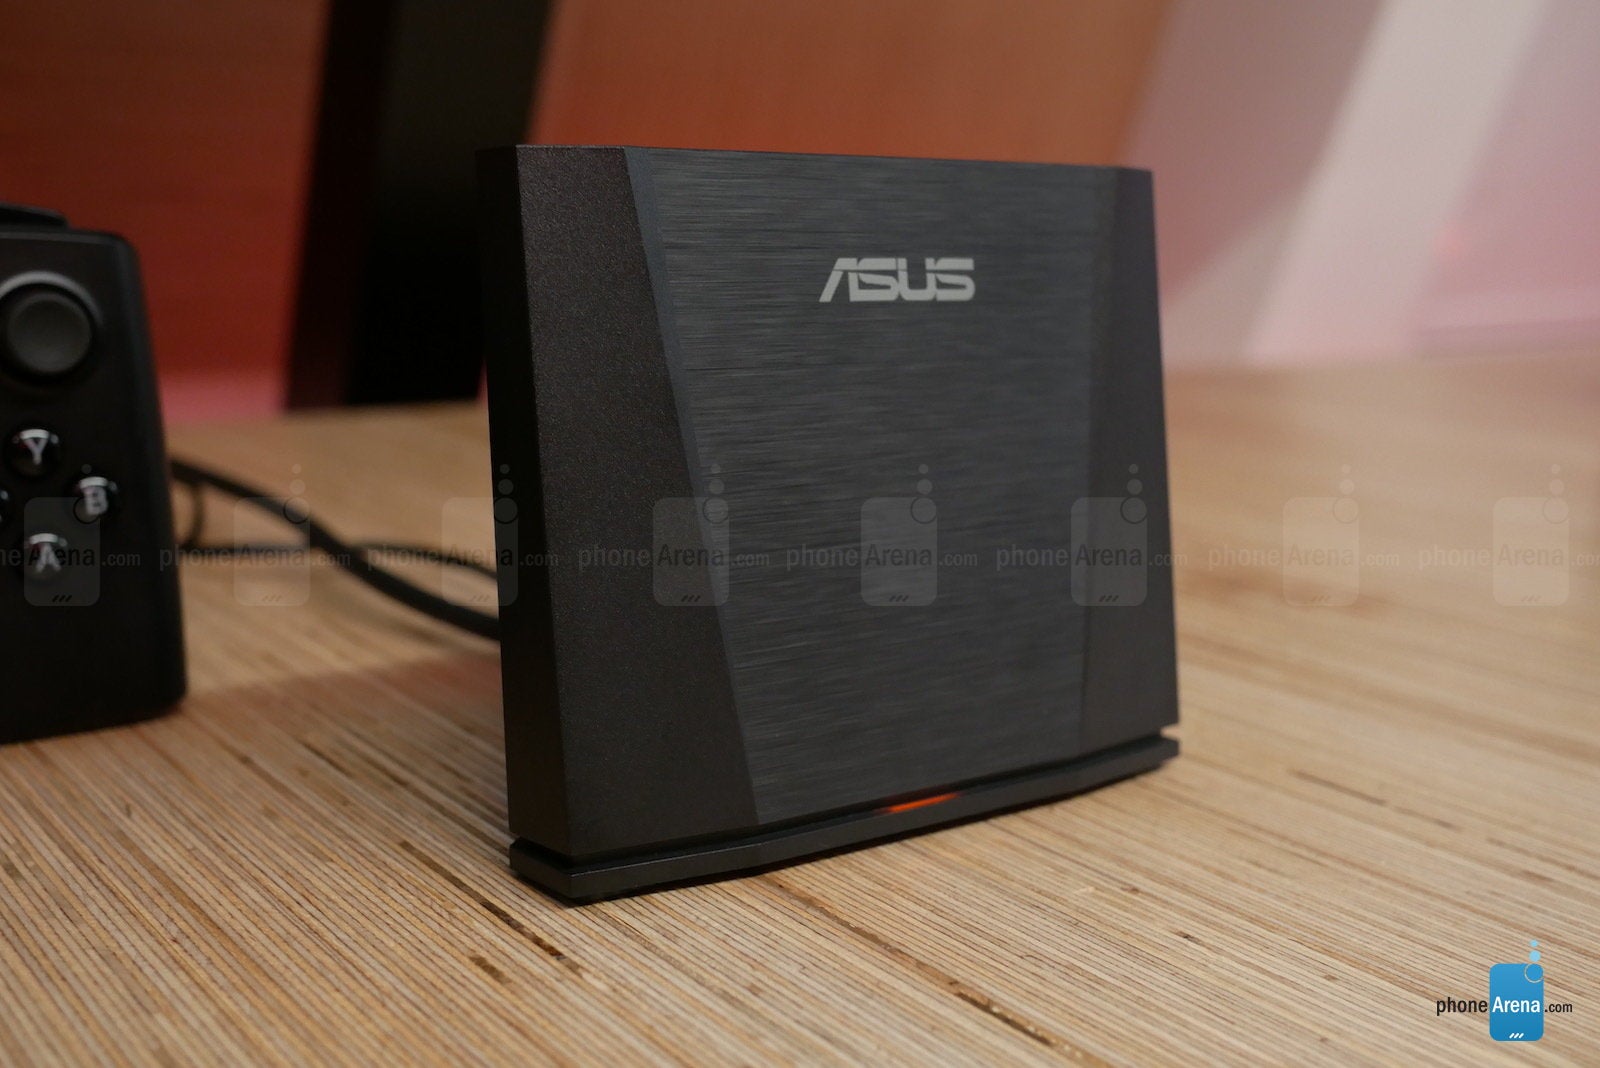 Asus ROG Phone and Accessories Hands-On: More Hardware, More Gaming